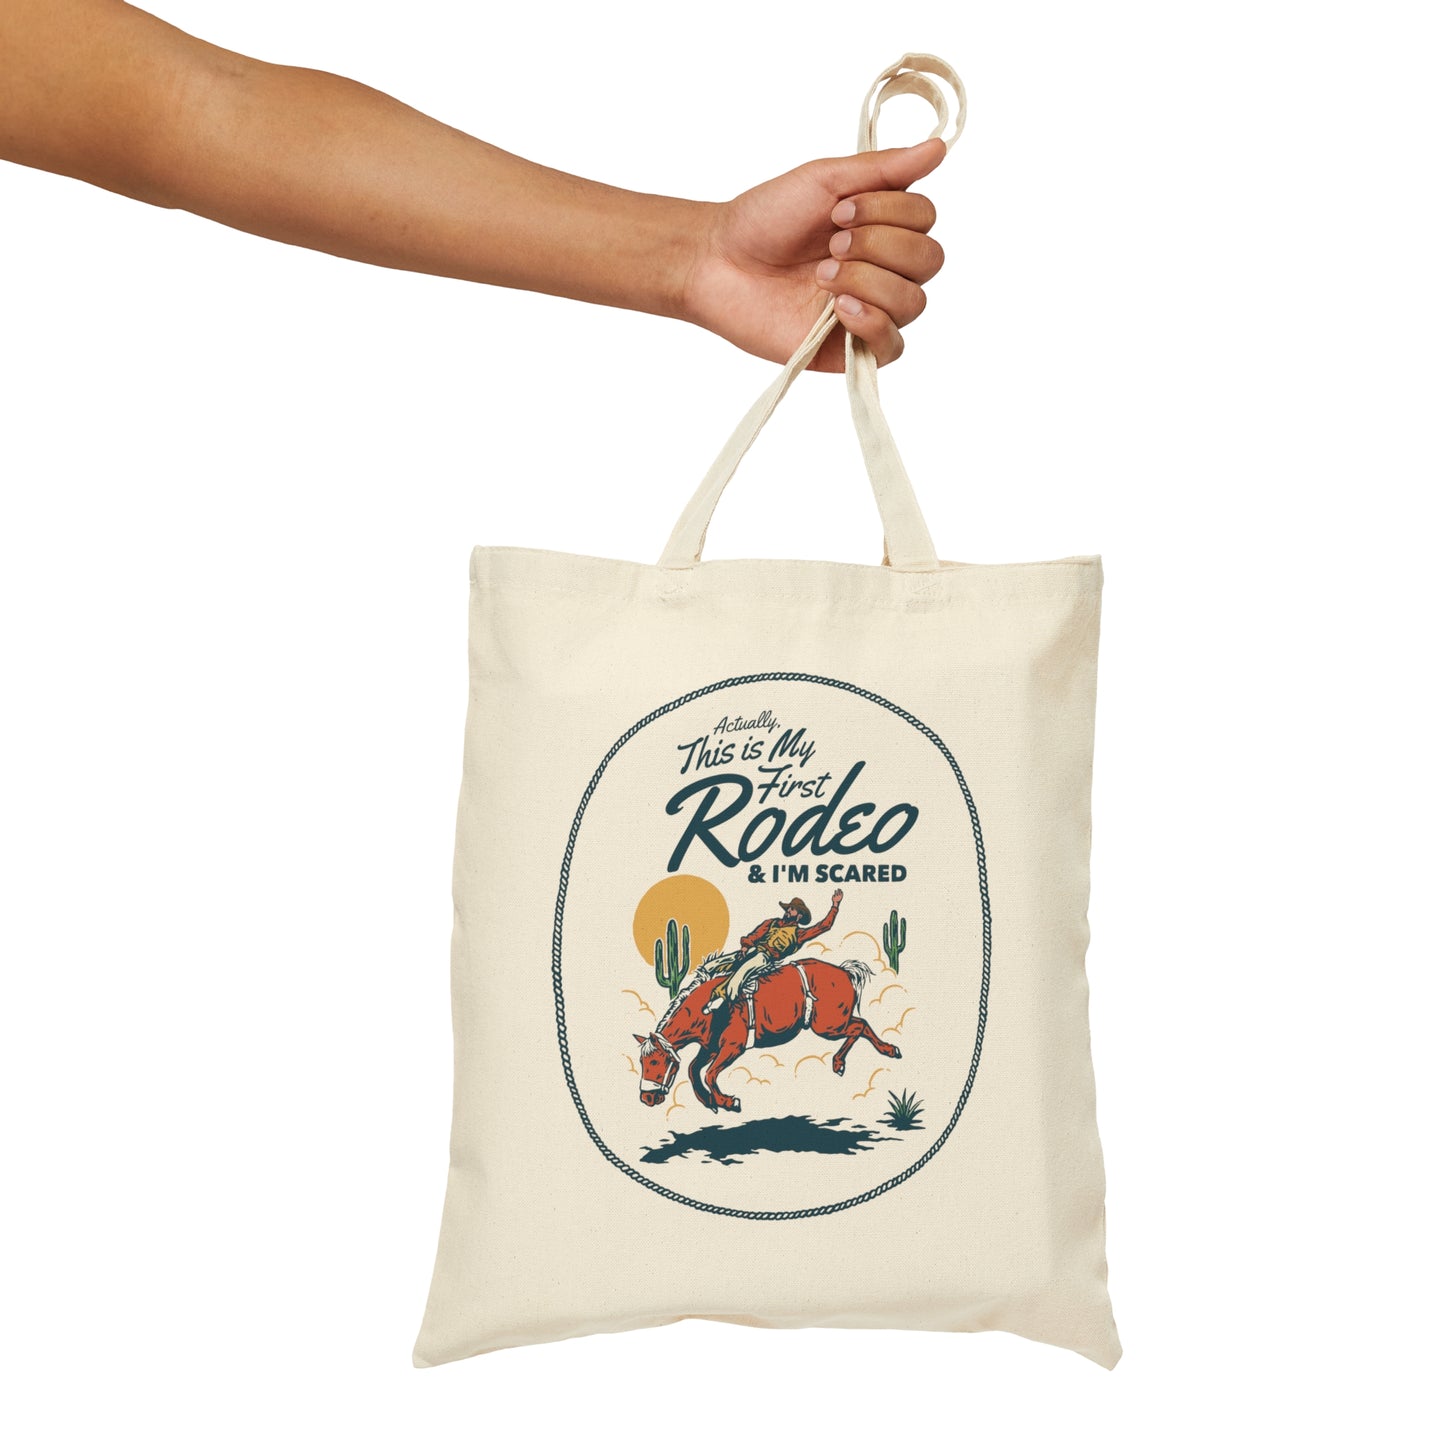 First Rodeo | Cotton Canvas Tote Bag